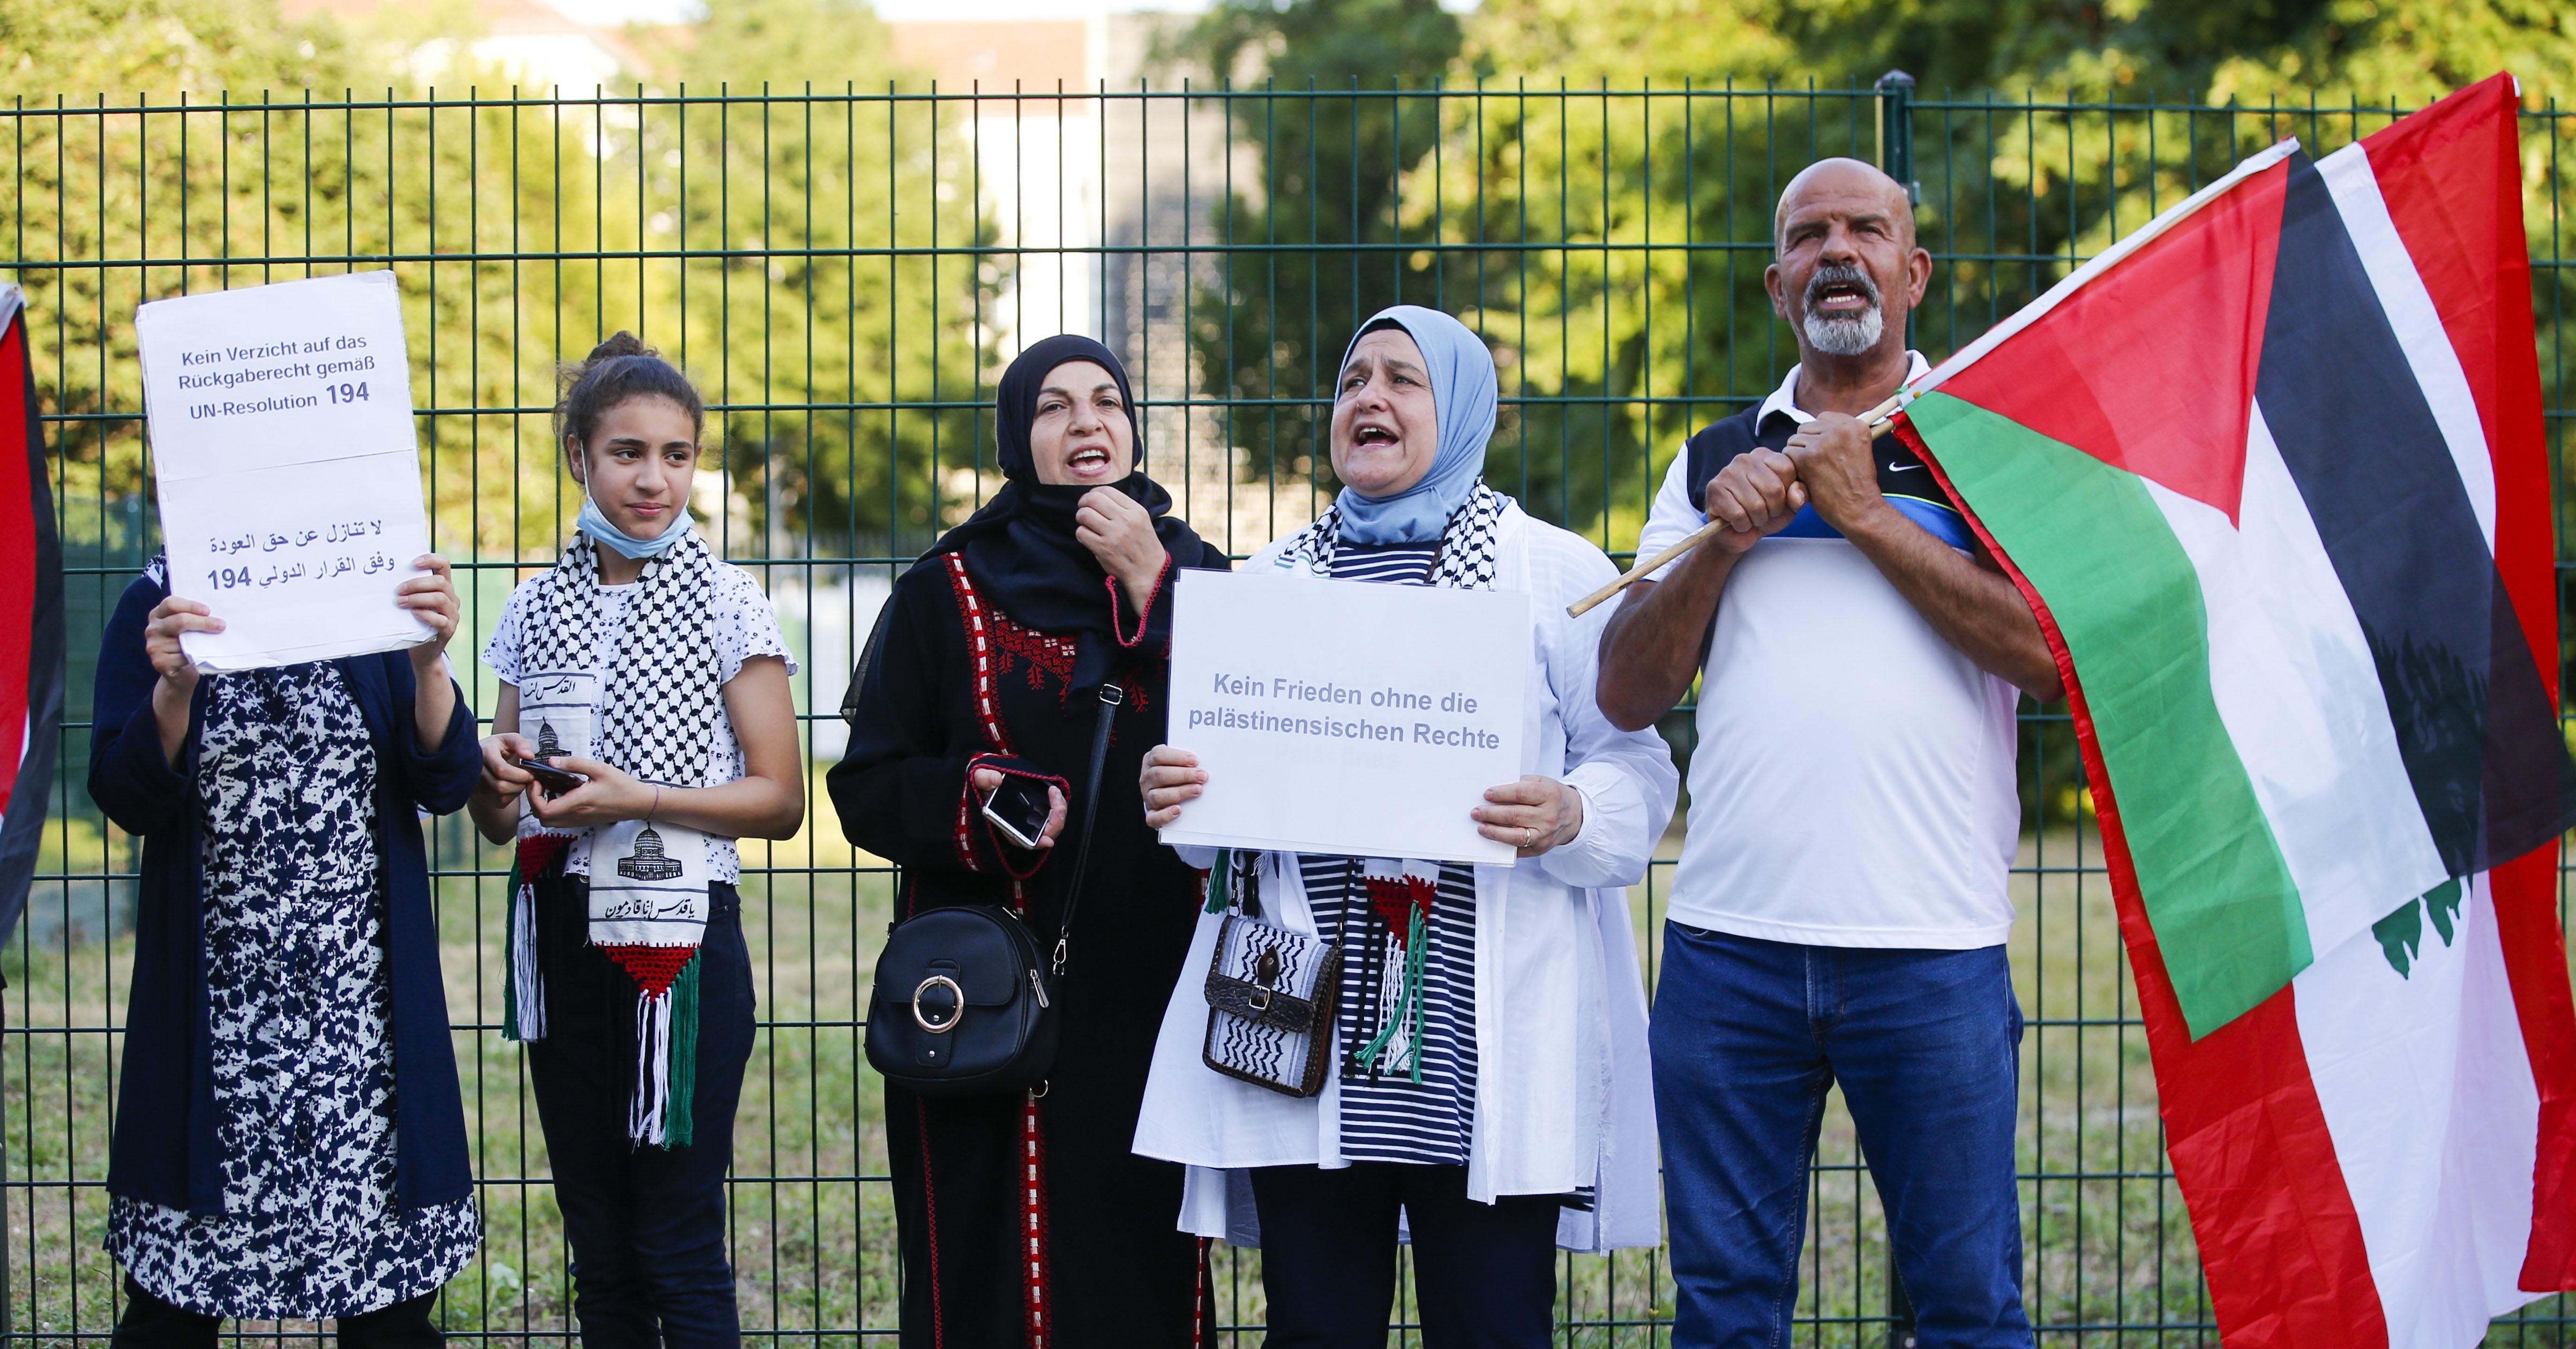 A group of Palestinians gathers in front of the UAE's Embassy in Berlin to protest against the UAE-Israel normalization deal, on August 17, 2020, in Berlin, Germany. (Photo by Abdulhamid Hosbas/Anadolu Agency via Getty Images)